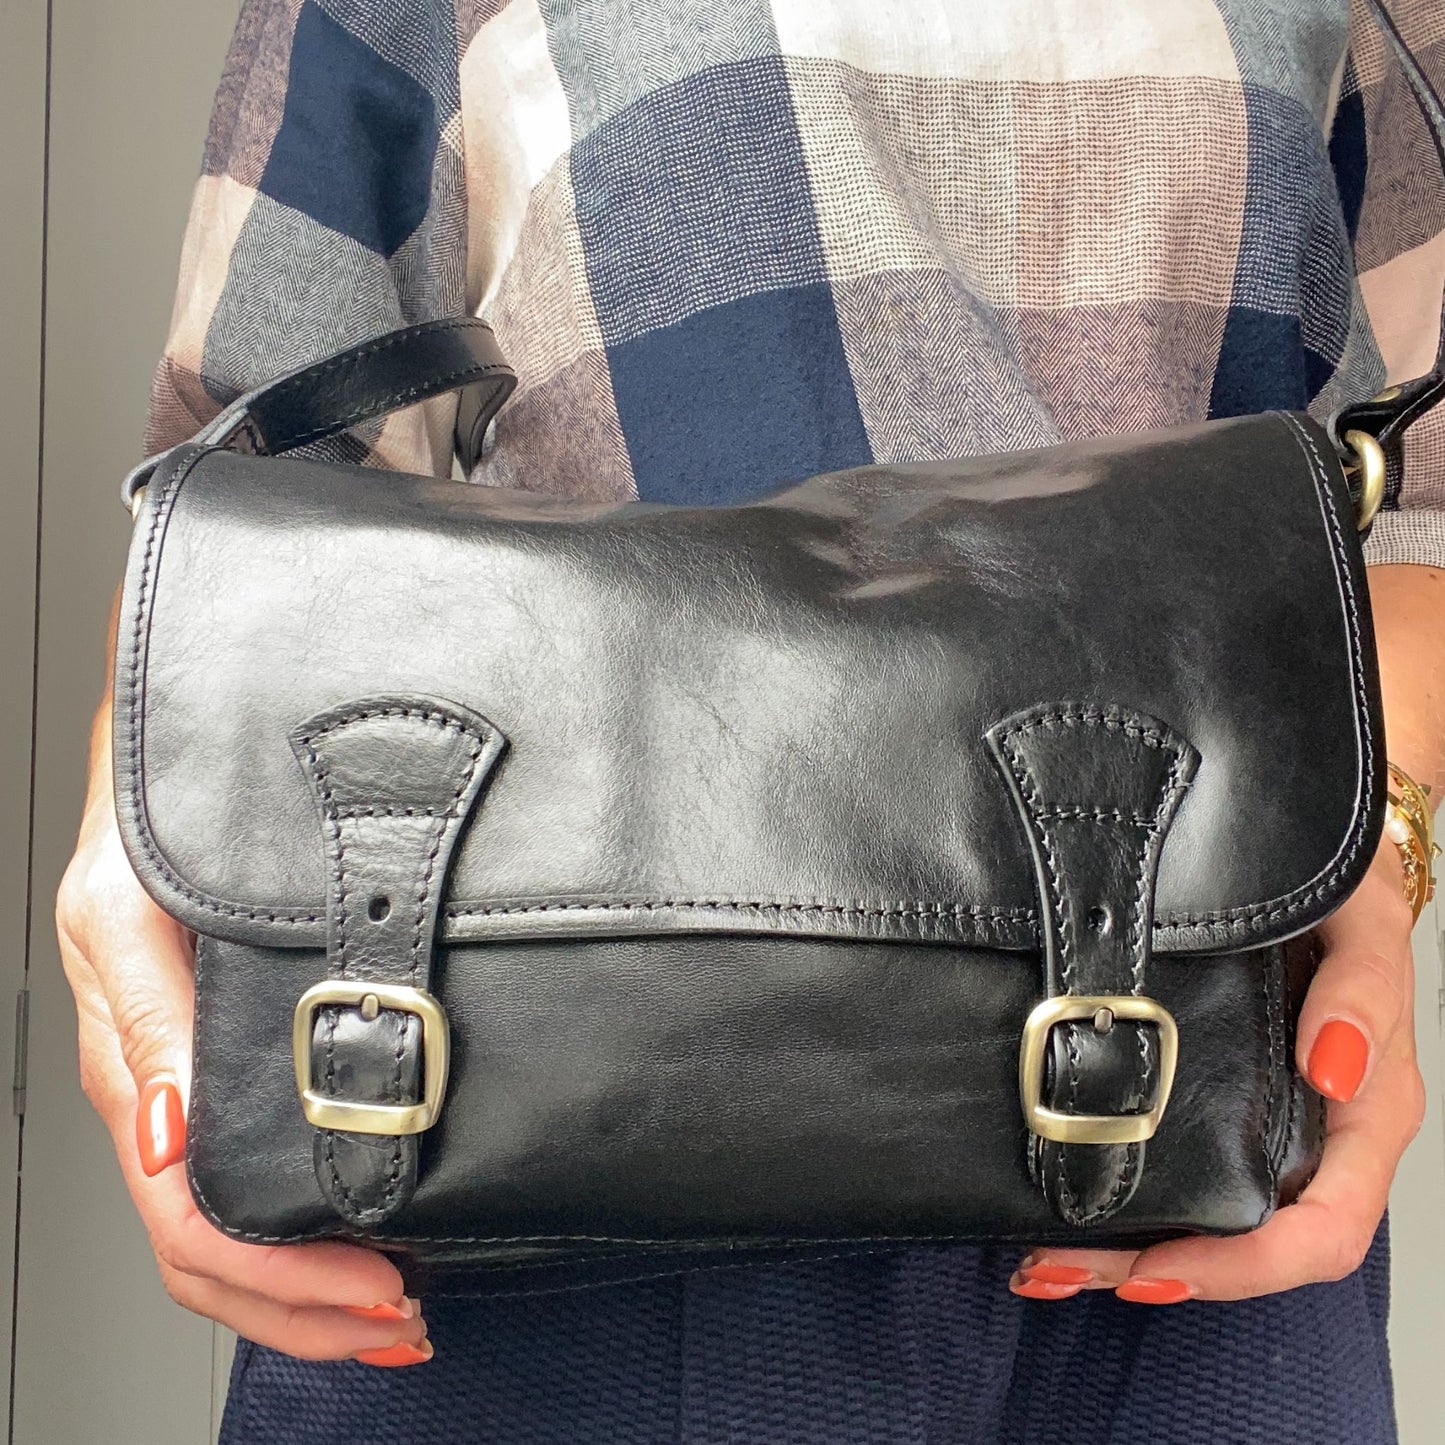 The Classic Leather Satchel